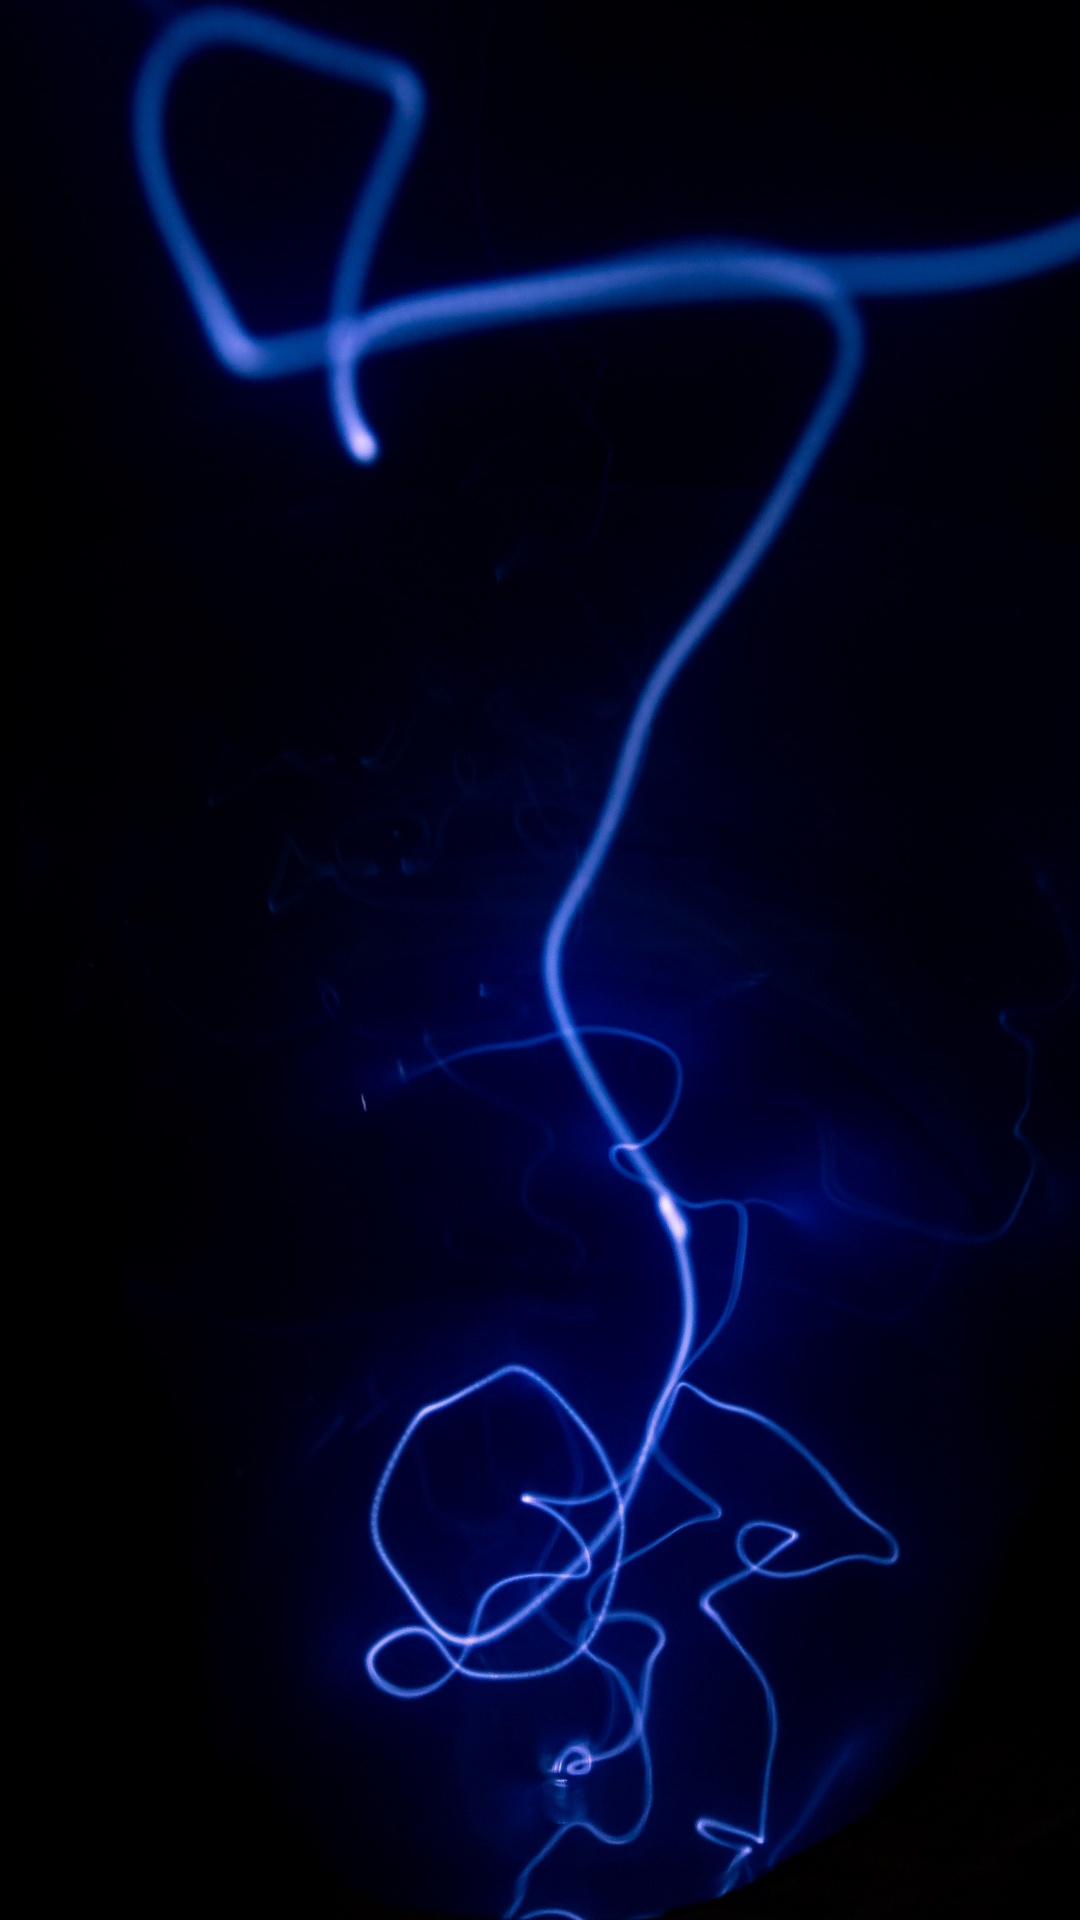 Blue and White Light Illustration. Wallpaper in 1080x1920 Resolution